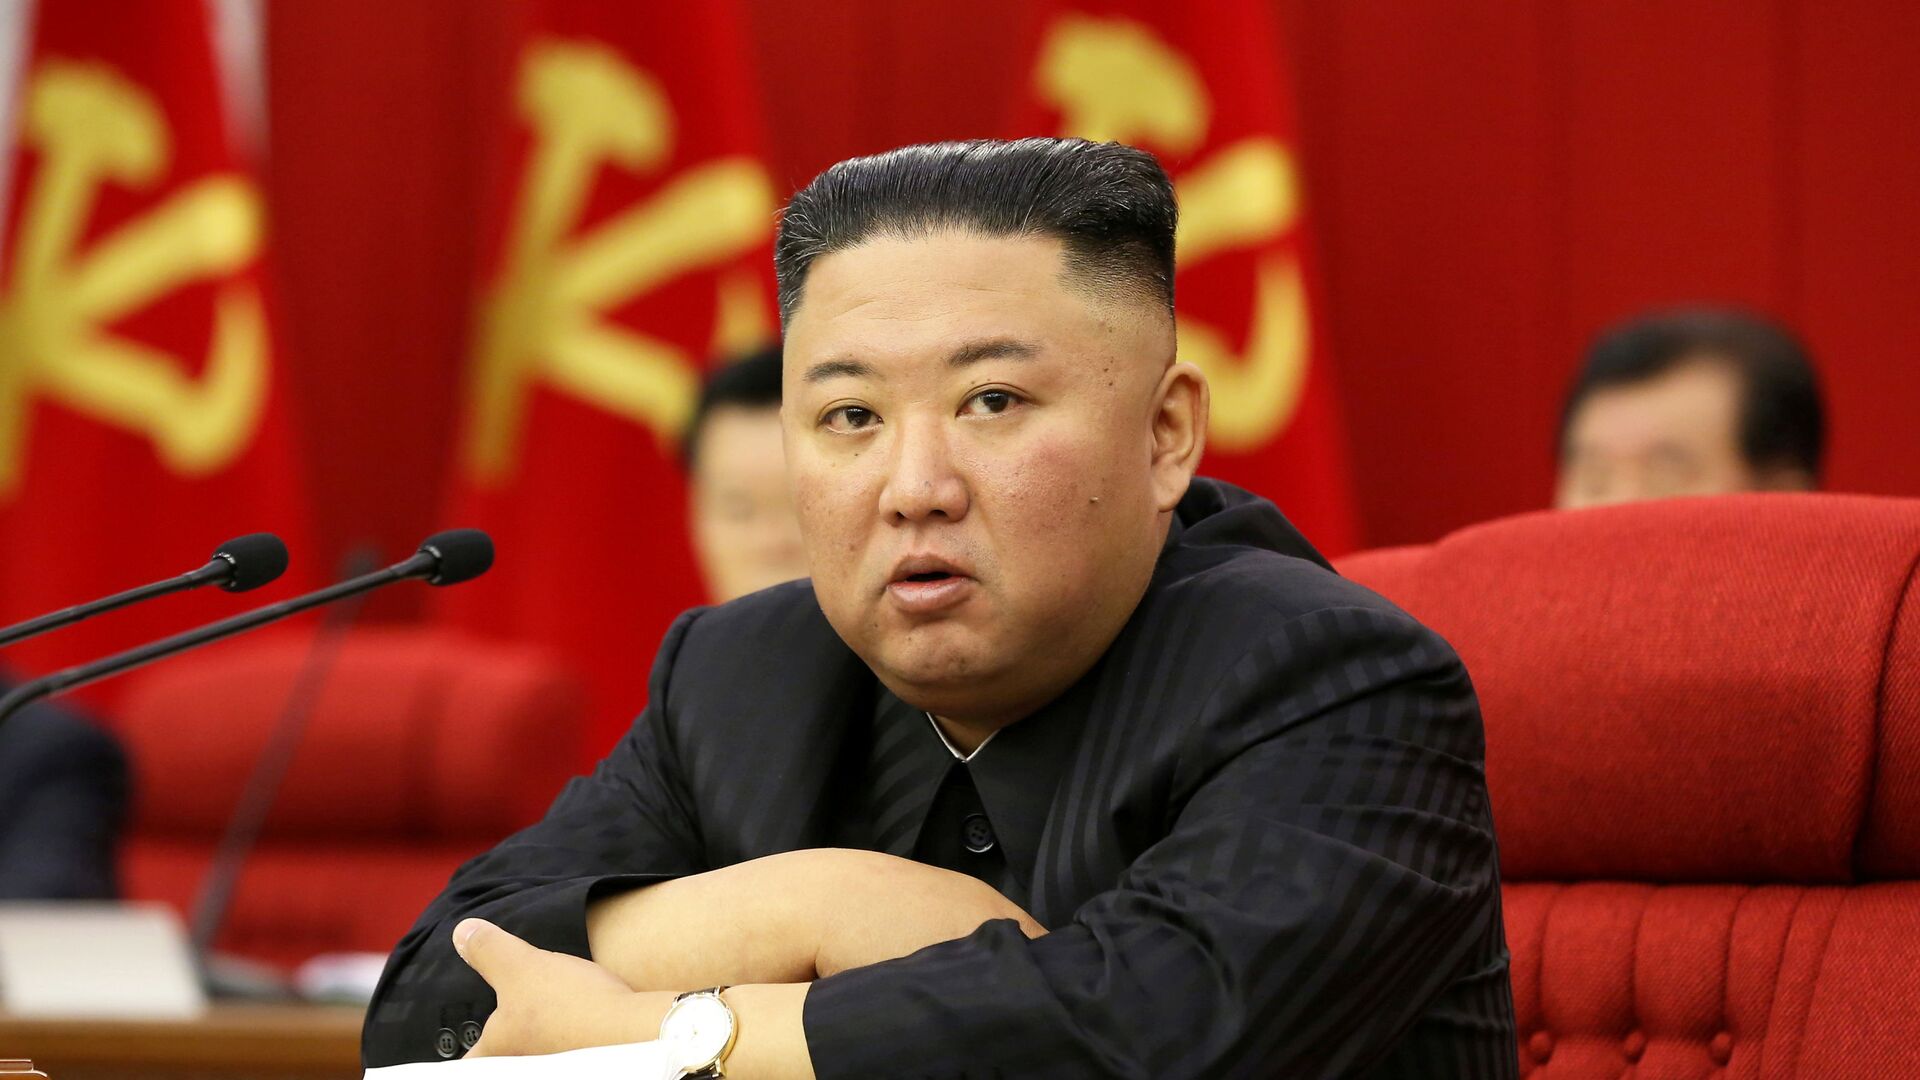 North Korean leader Kim Jong Un speaks at a meeting of the Workers' Party of Korea in Pyongyang, North Korea in this image released June 18, 2021 by the country's Korean Central News Agency. - Sputnik International, 1920, 27.06.2021